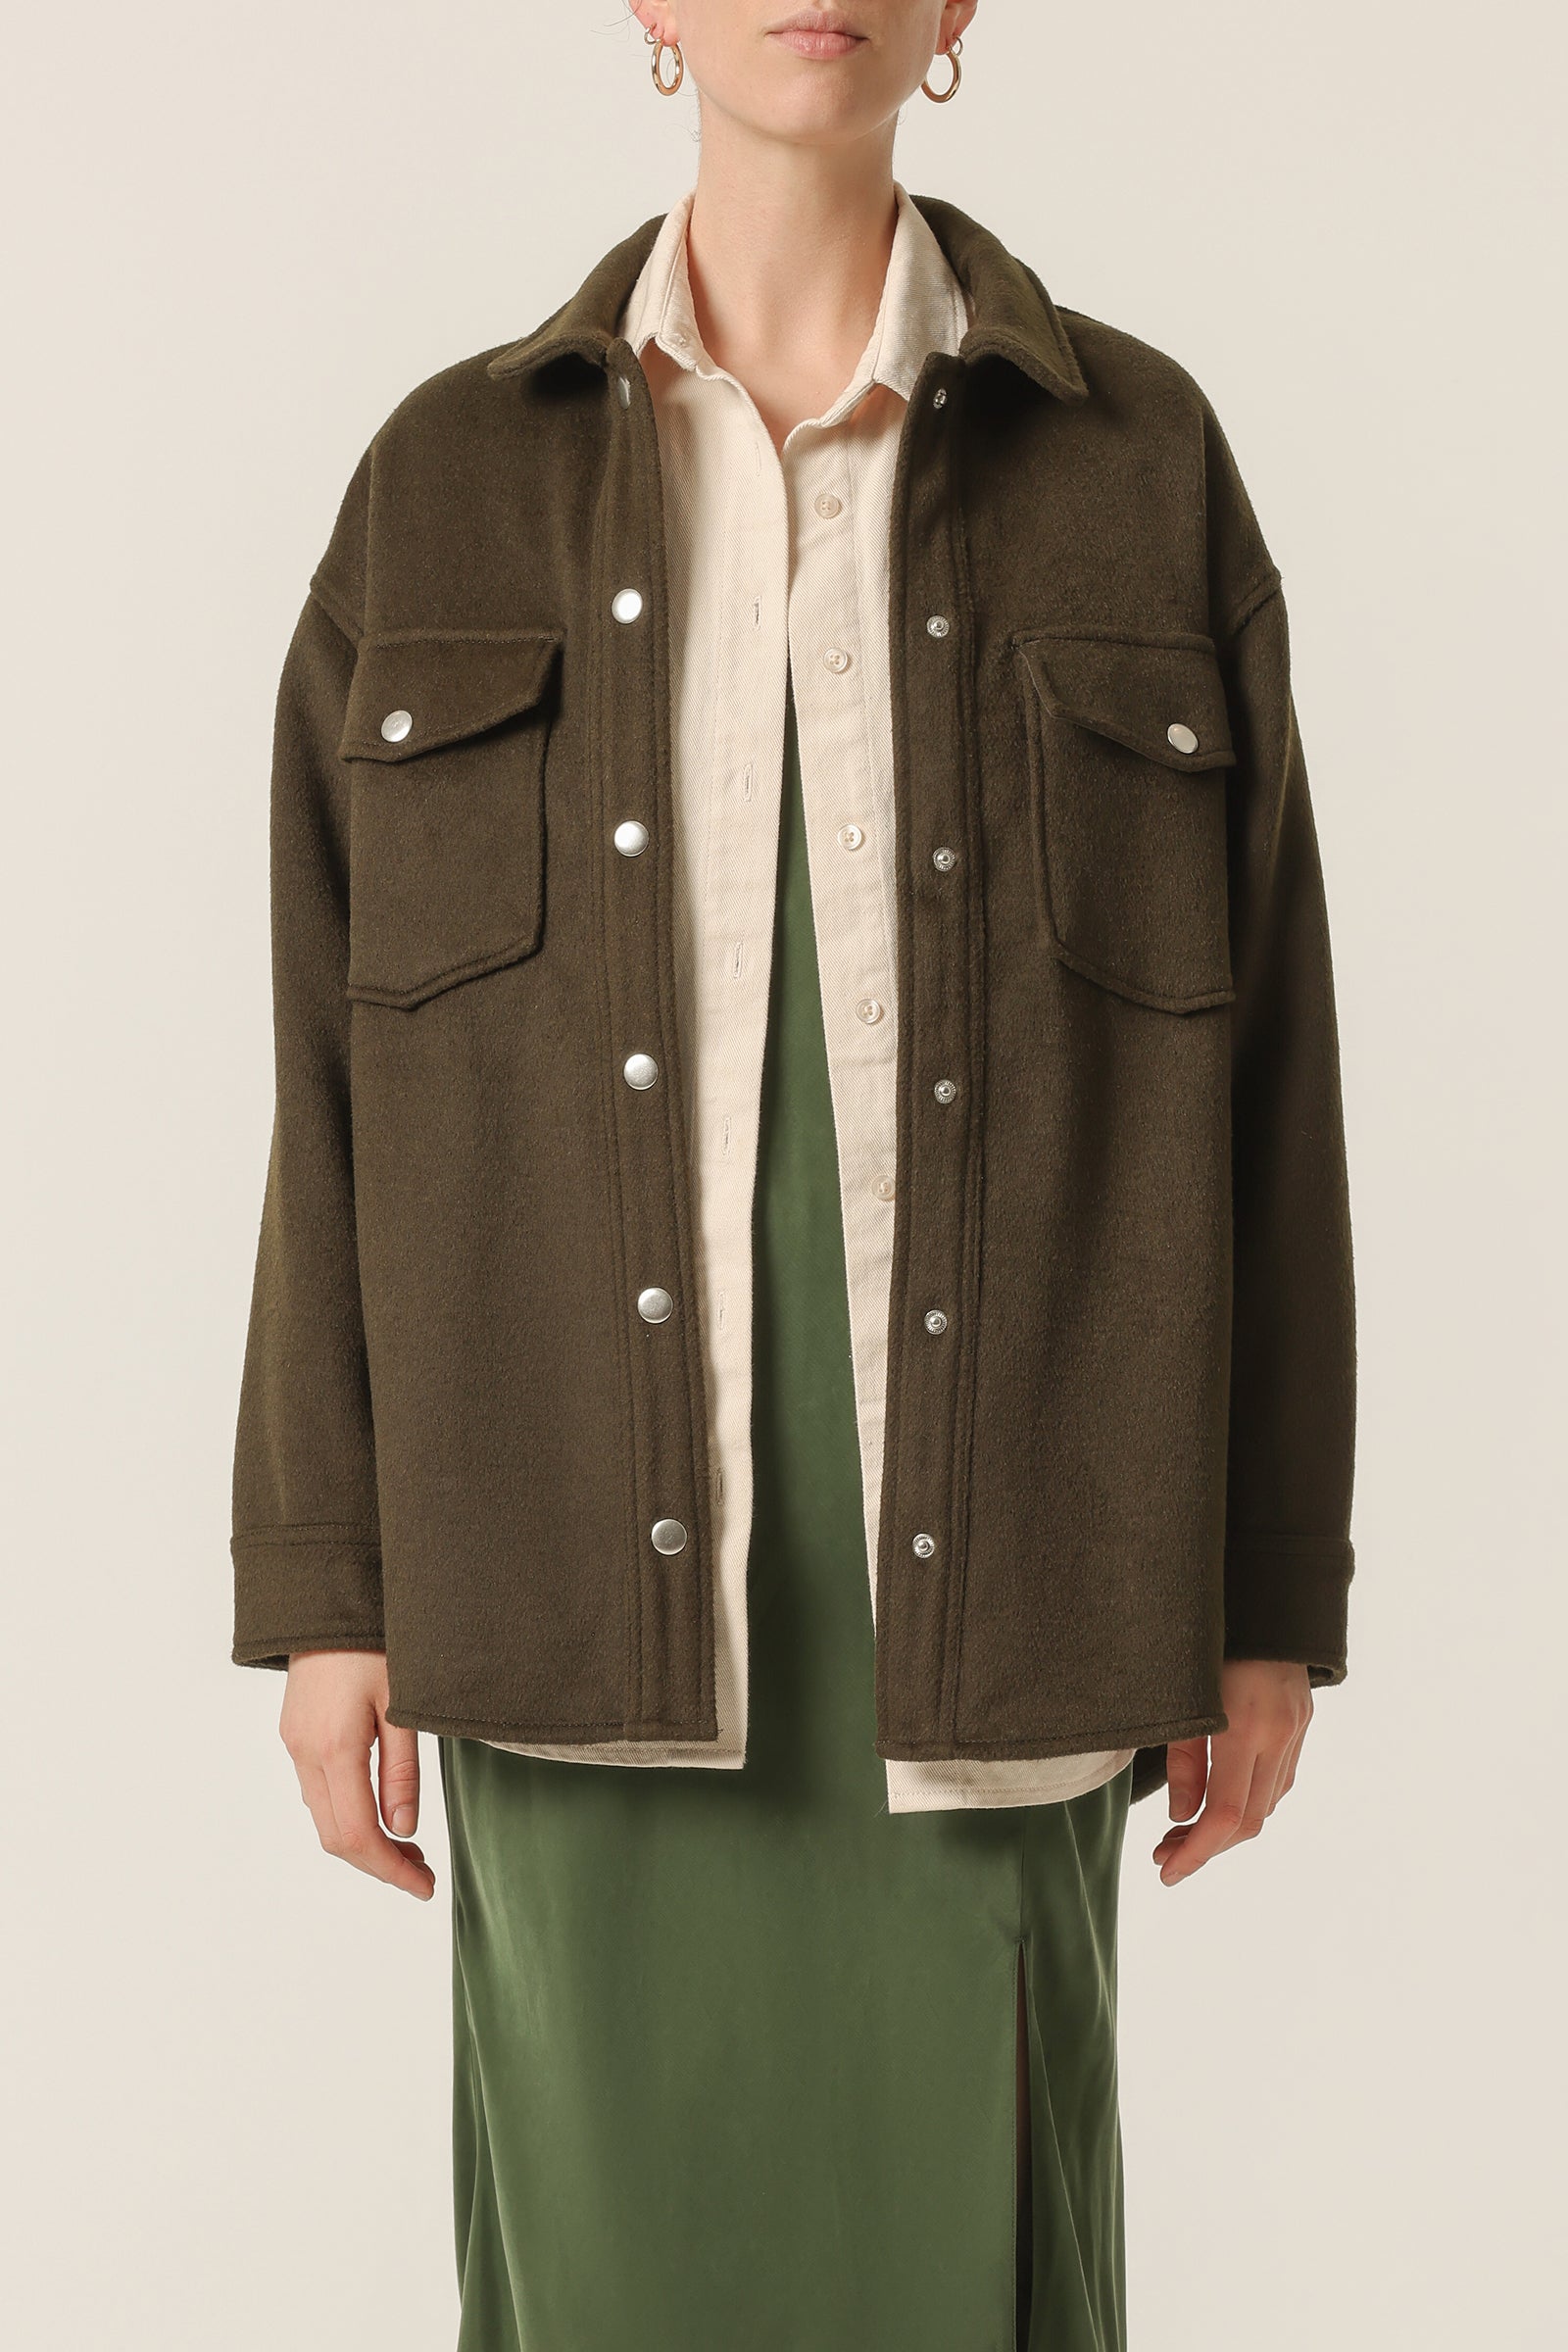 Nude Lucy Carson Wool Jacket In an Green Fig Colour